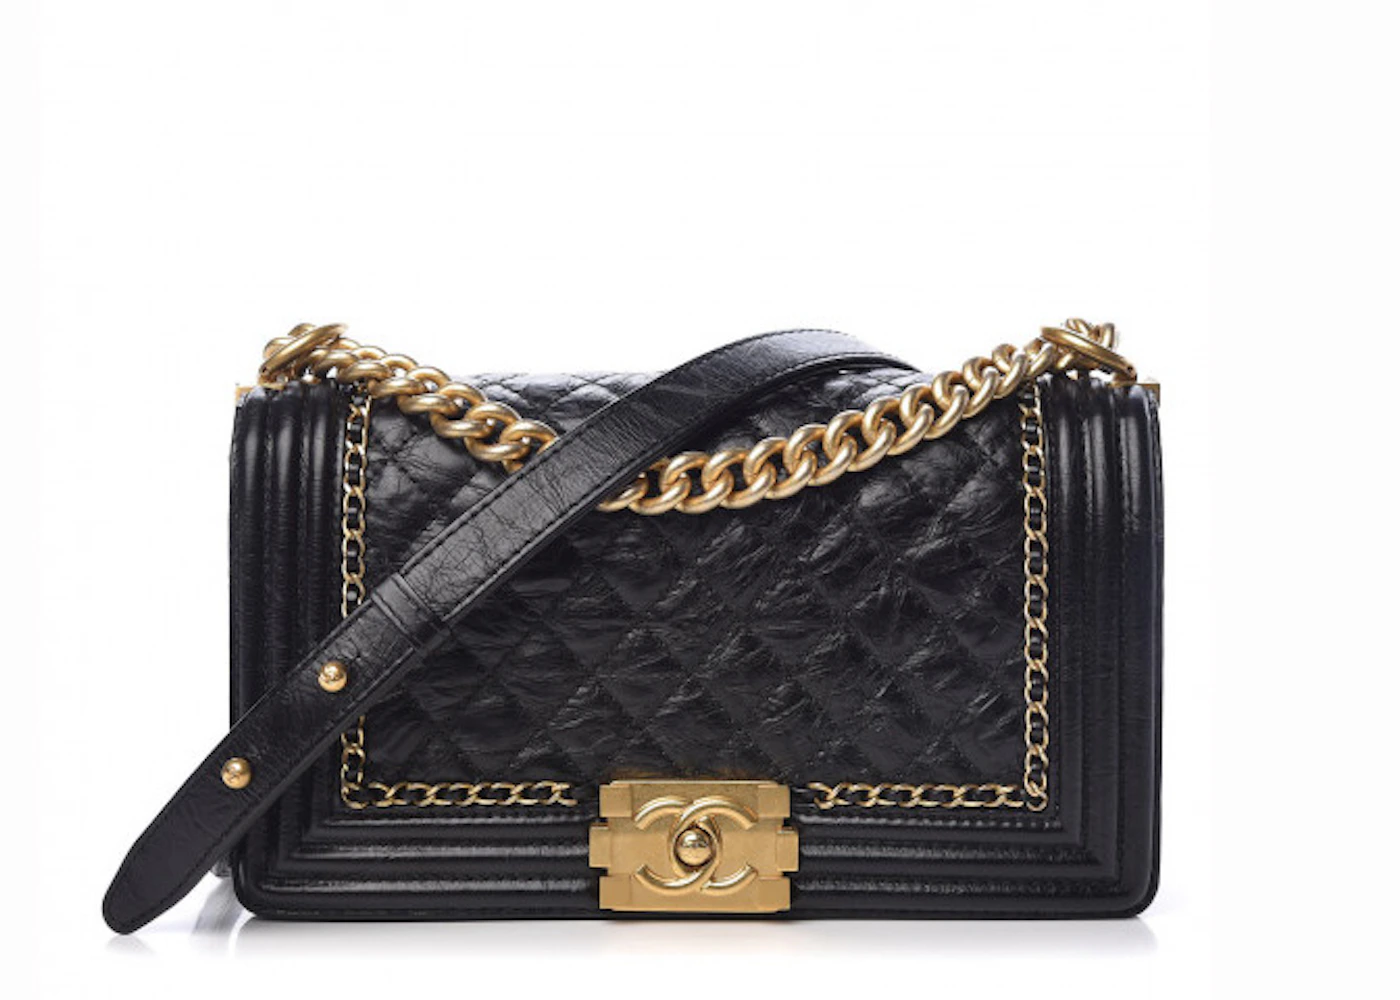 Chanel Black Quilted New Medium Boy Bag of Lambskin Leather with